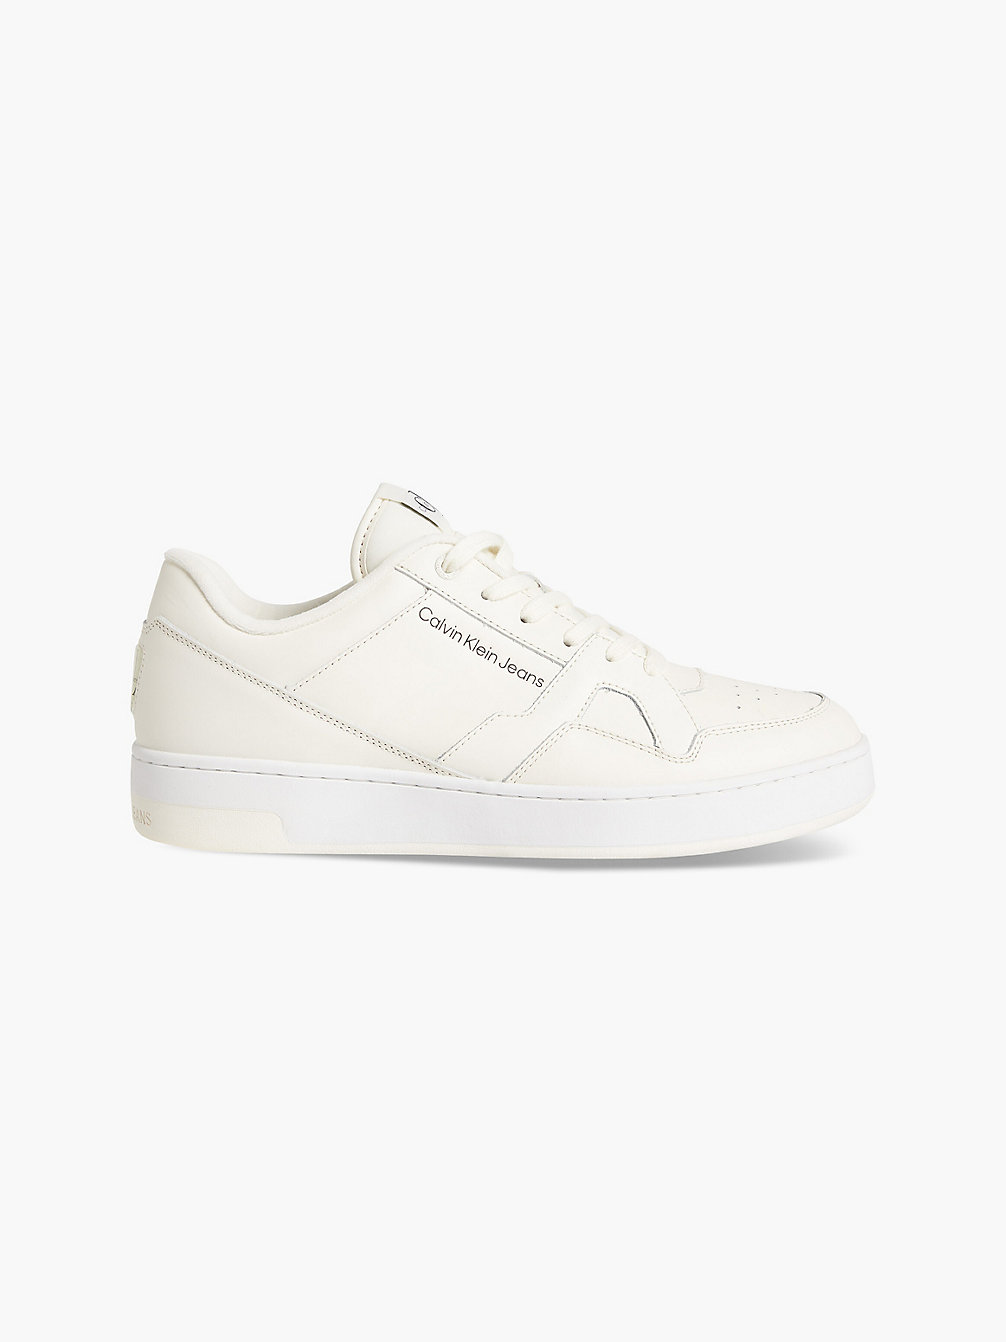 OFF WHITE Leather Trainers undefined men Calvin Klein